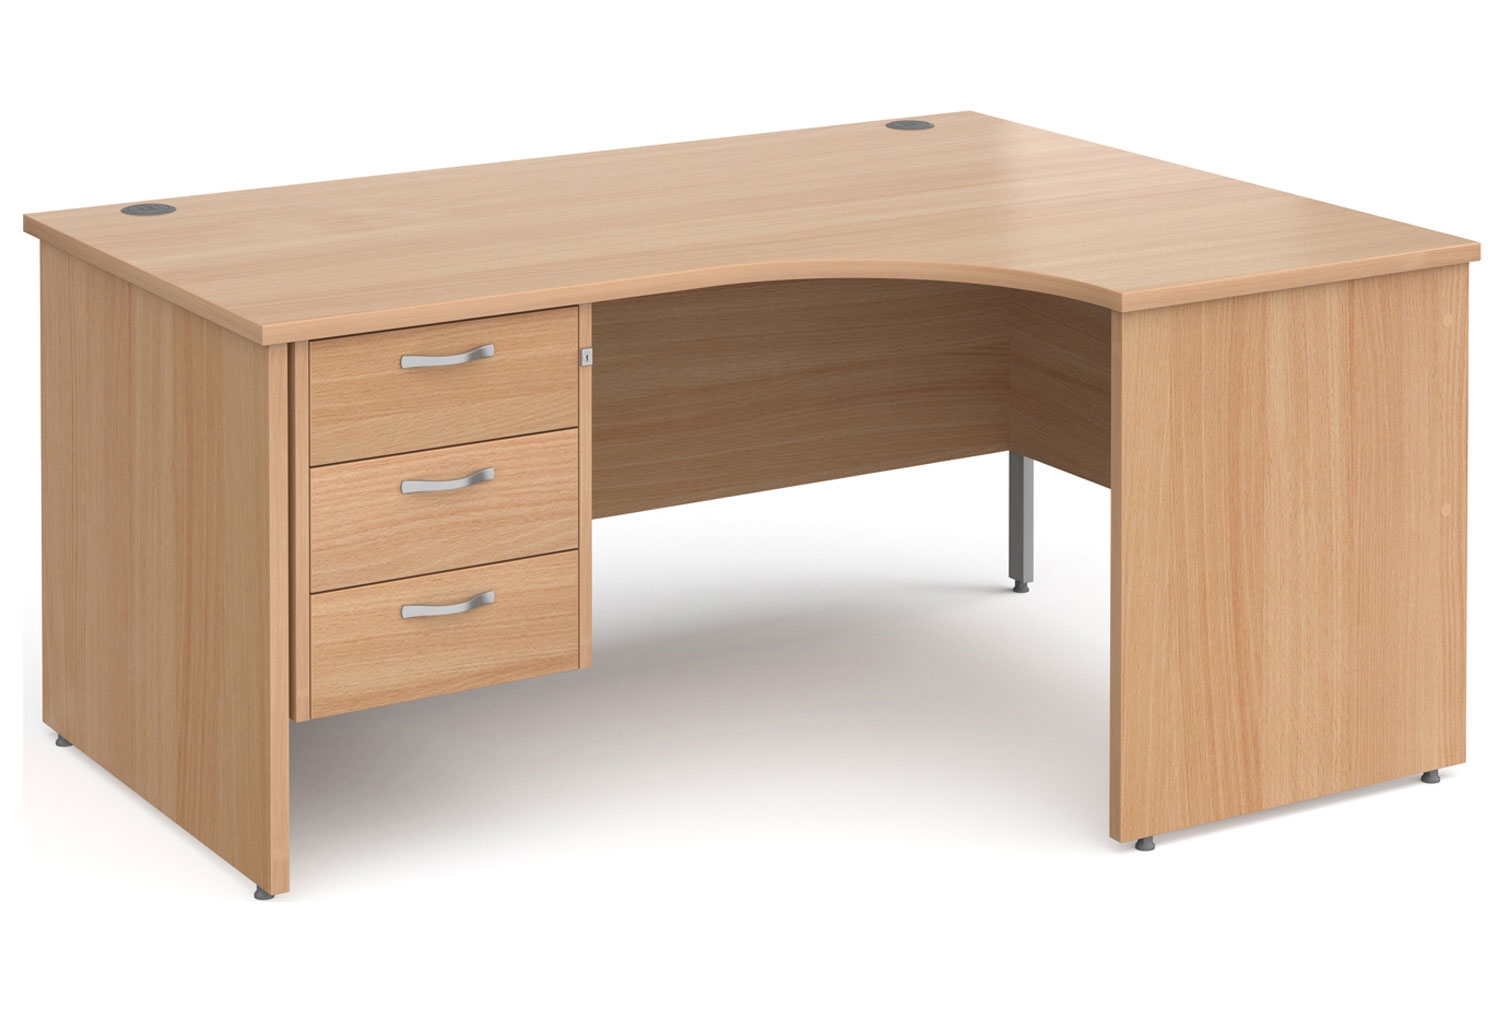 Tully Panel End Right Hand Ergonomic Office Desk 3 Drawers, 160wx120/80dx73h (cm), Beech, Express Delivery